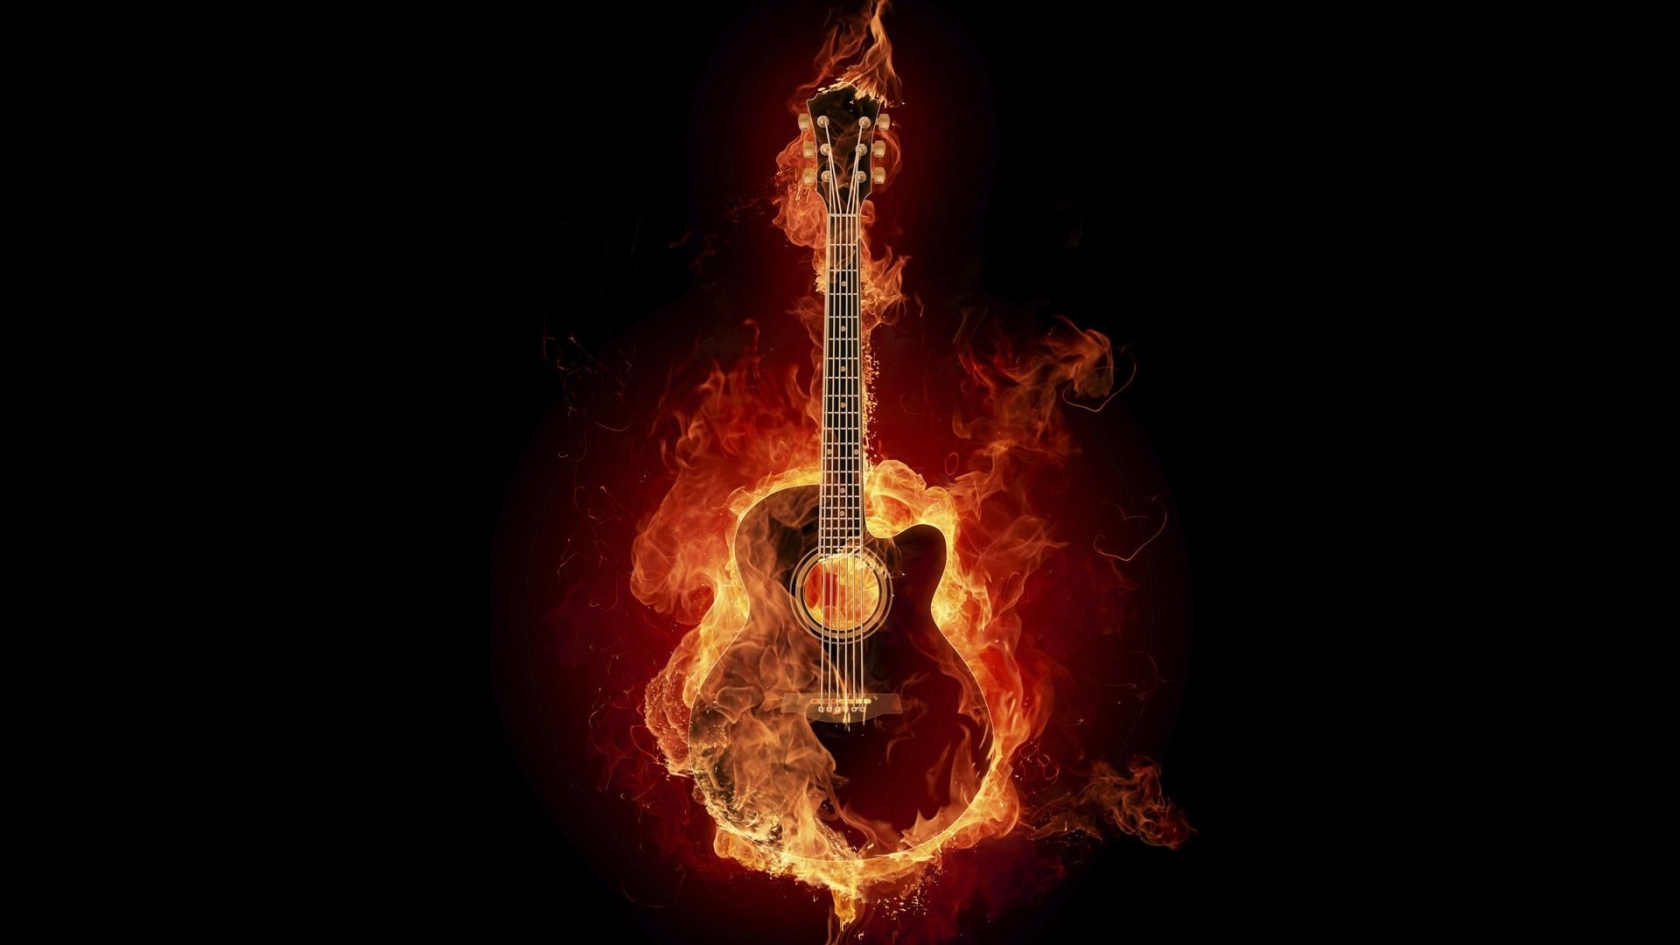 Great Fire Guitar for 1680 x 945 HDTV resolution